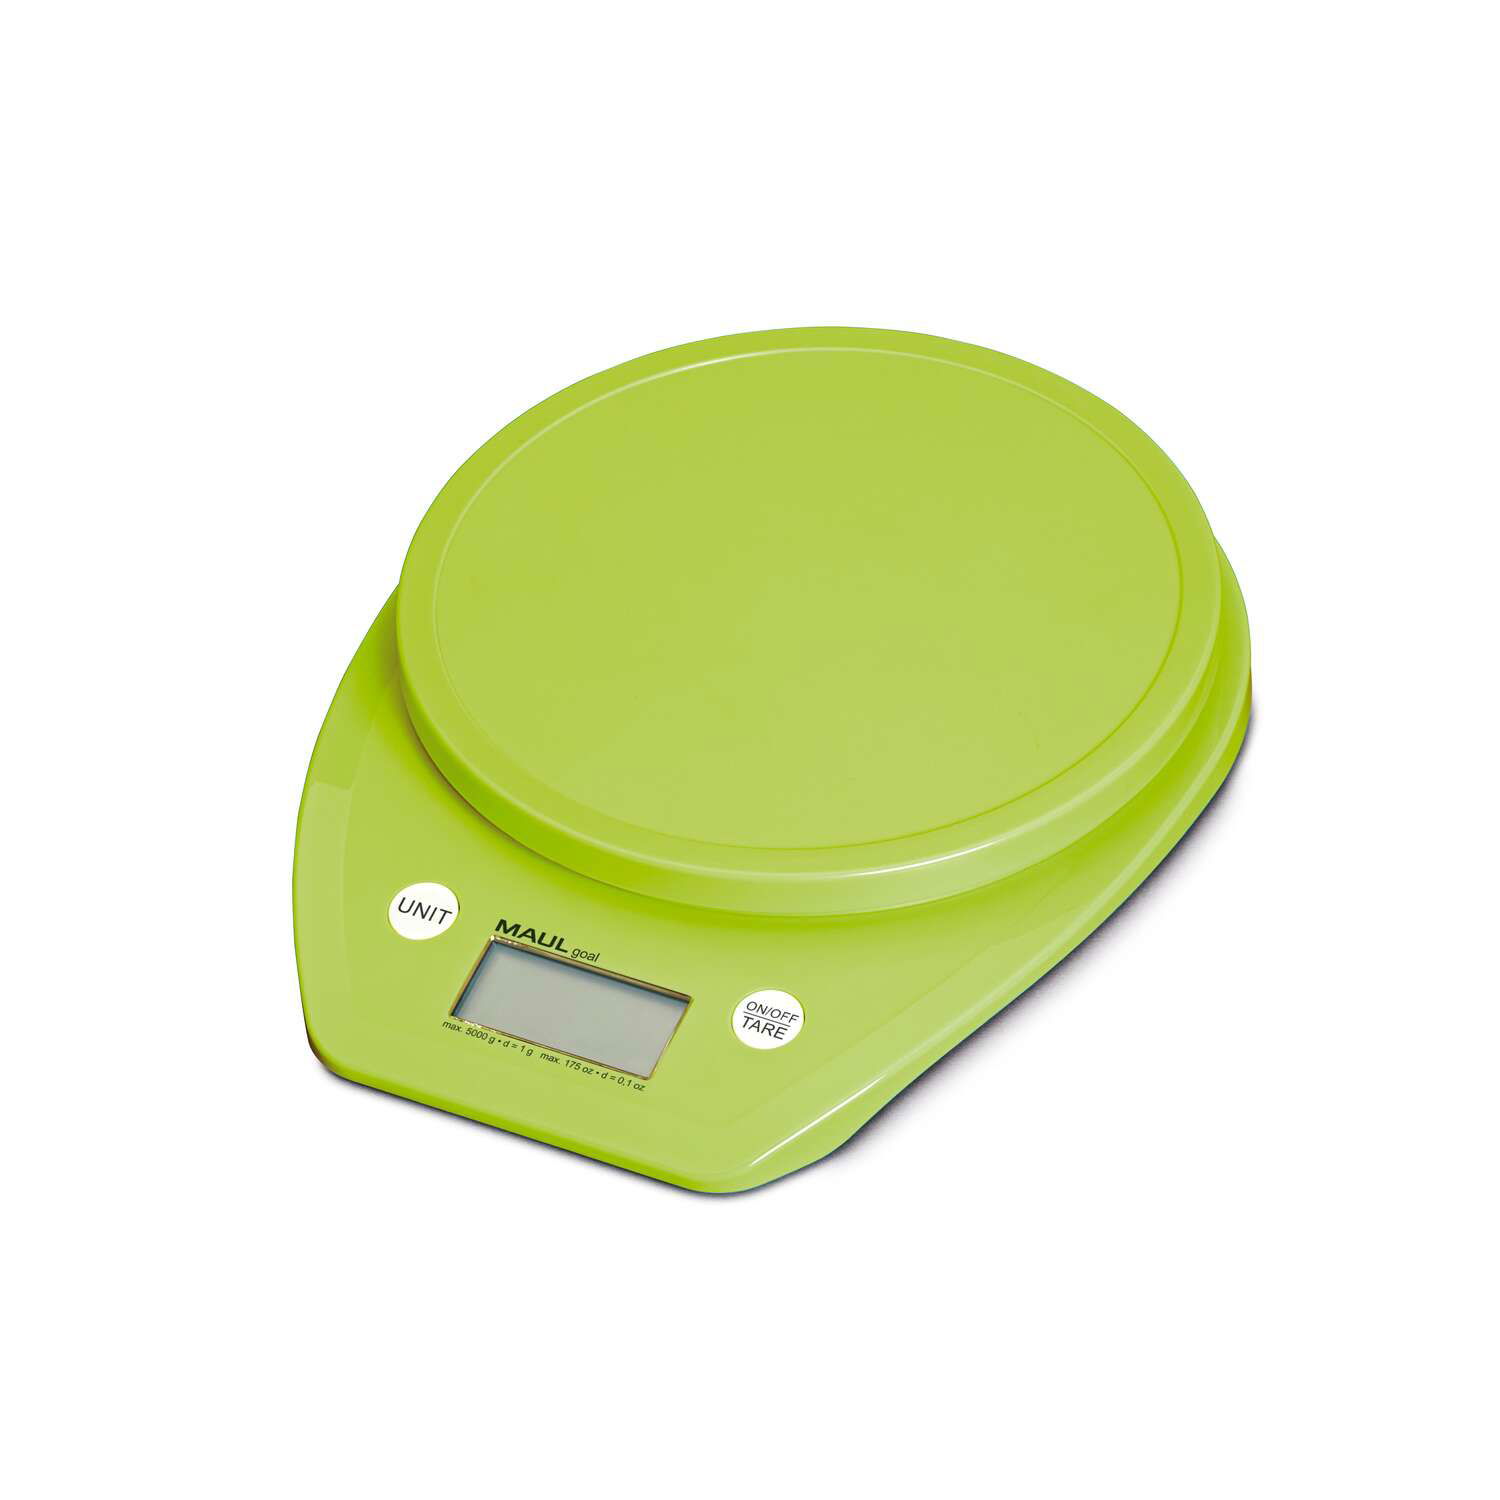 Briefwaage MAULgoal mit Batterie, 5000 g